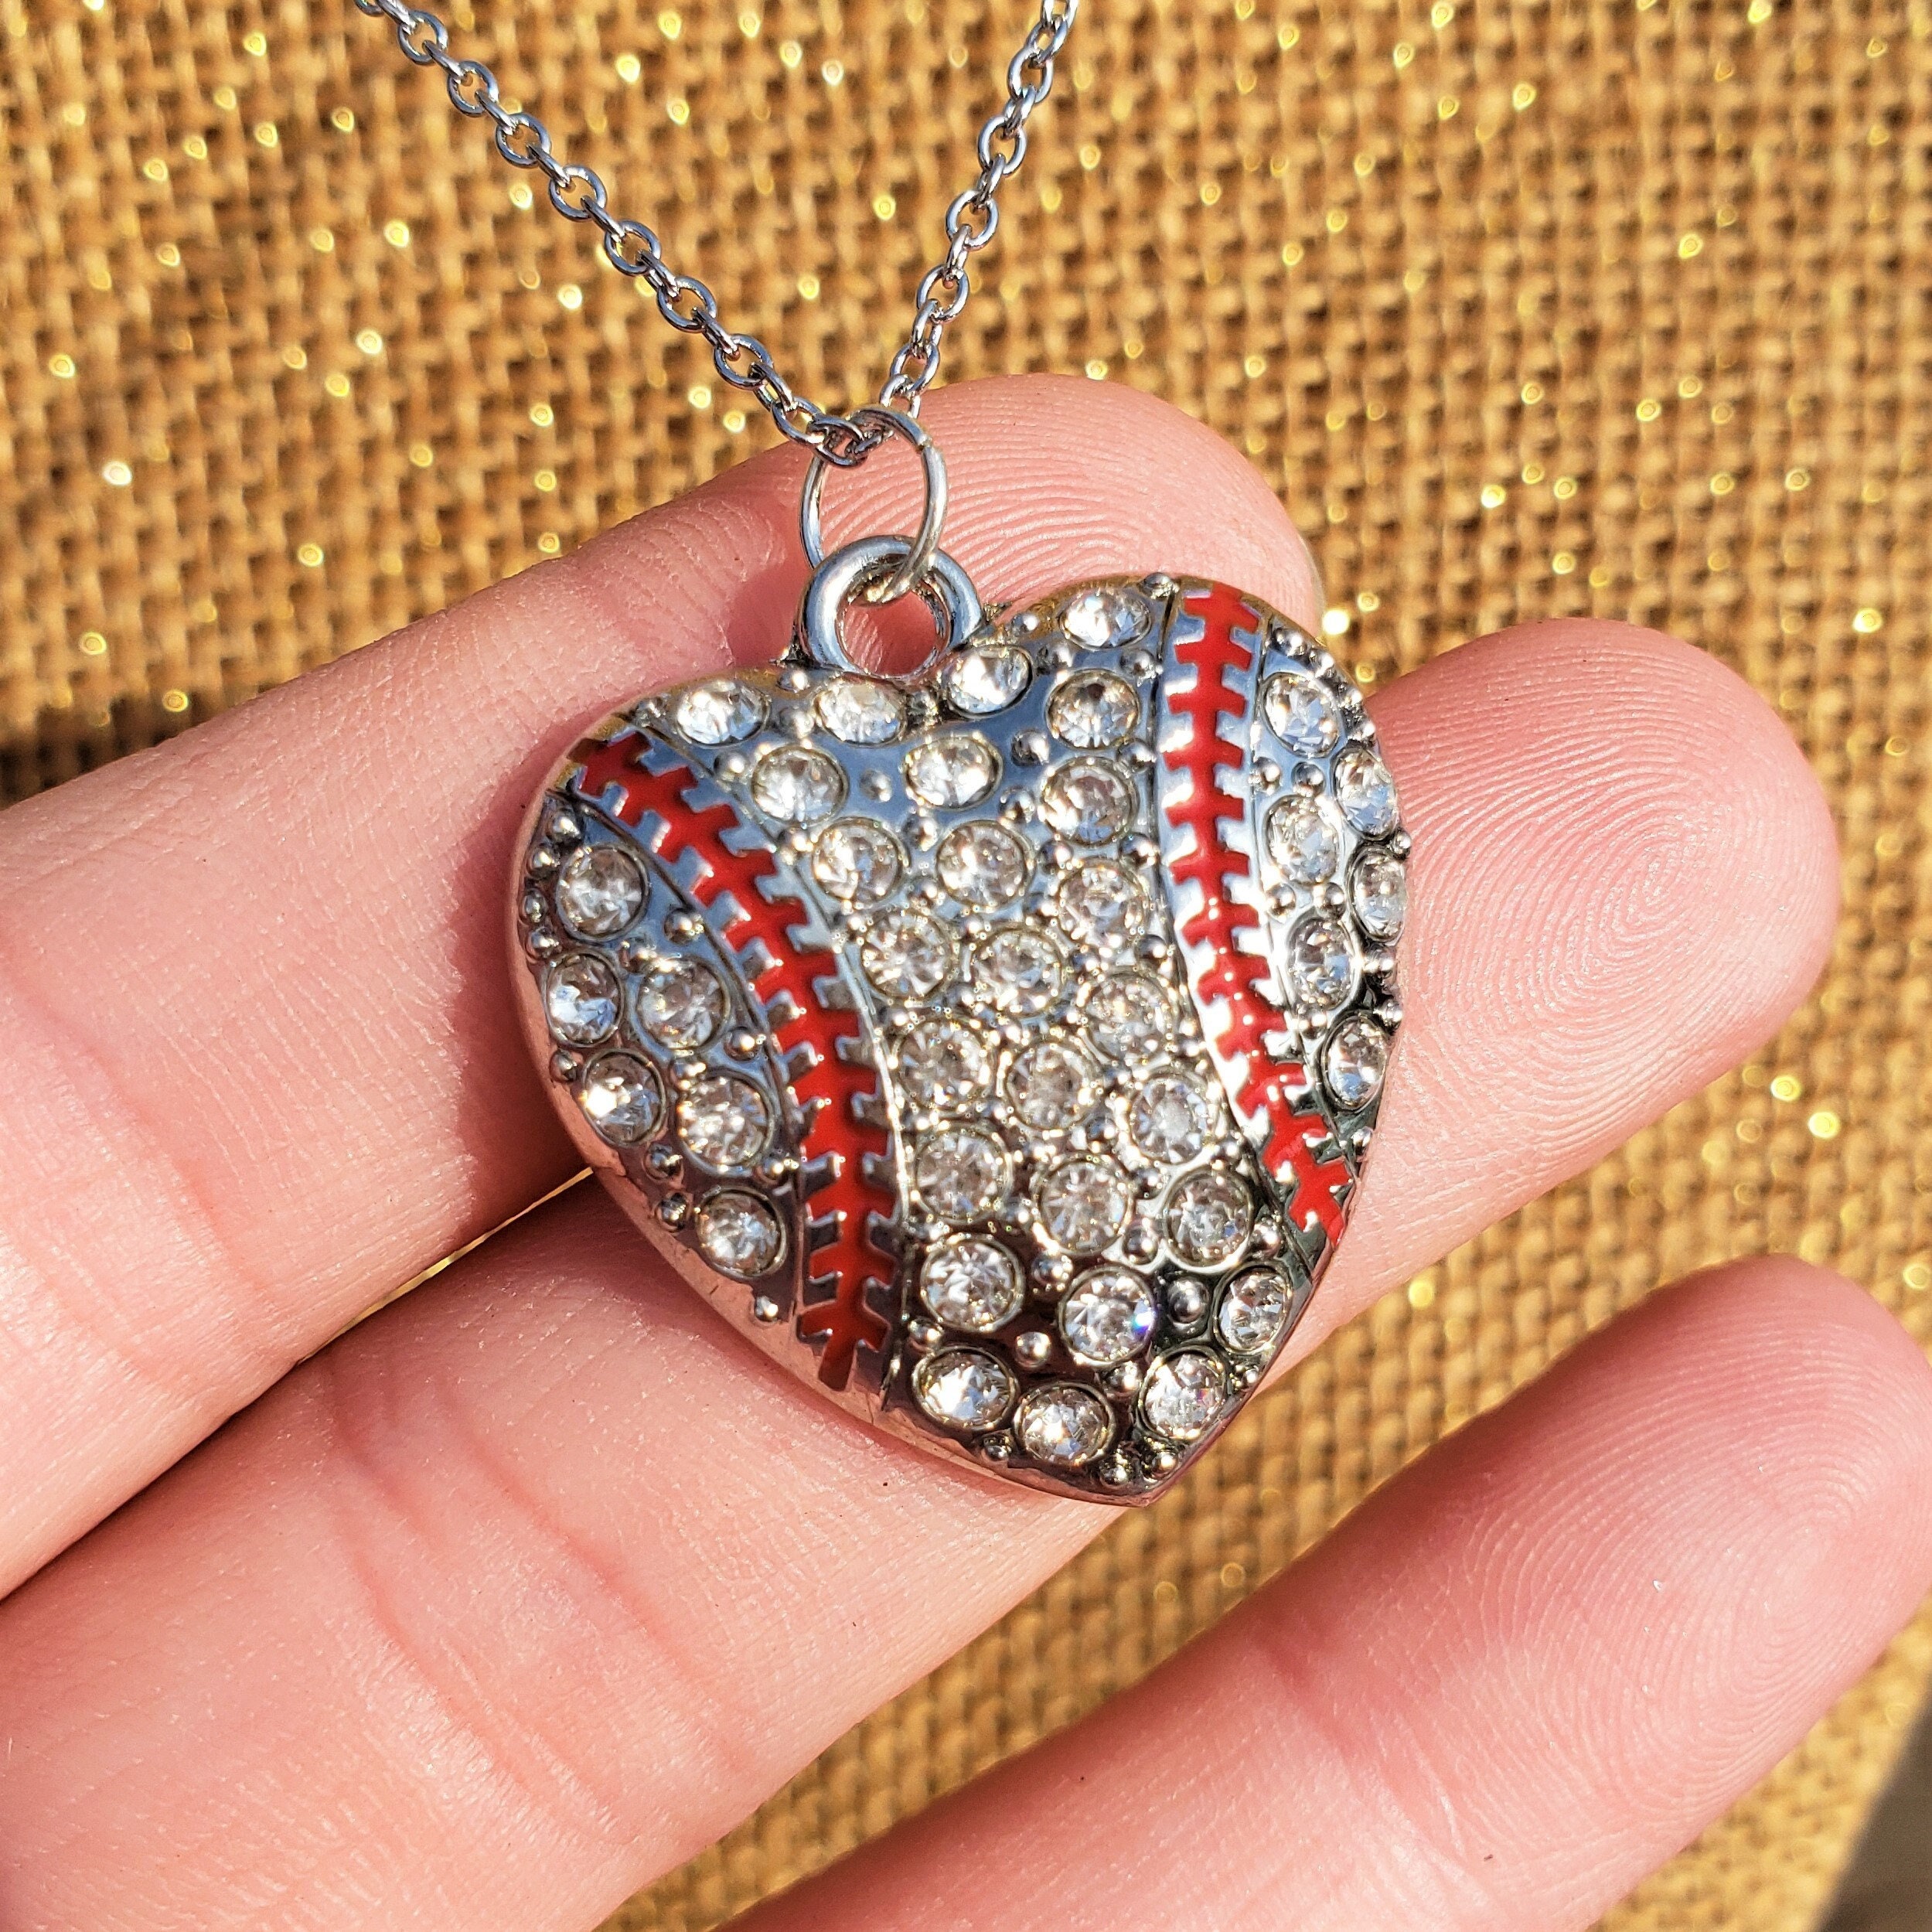 Top Quality Crystal Rhinestone Diamond Silver Pendant Necklace For Women  Perfect For Sports And Baseball Fans Fashionable Silver Chain Jewelry From  Lulu_baby, $1.19 | DHgate.Com